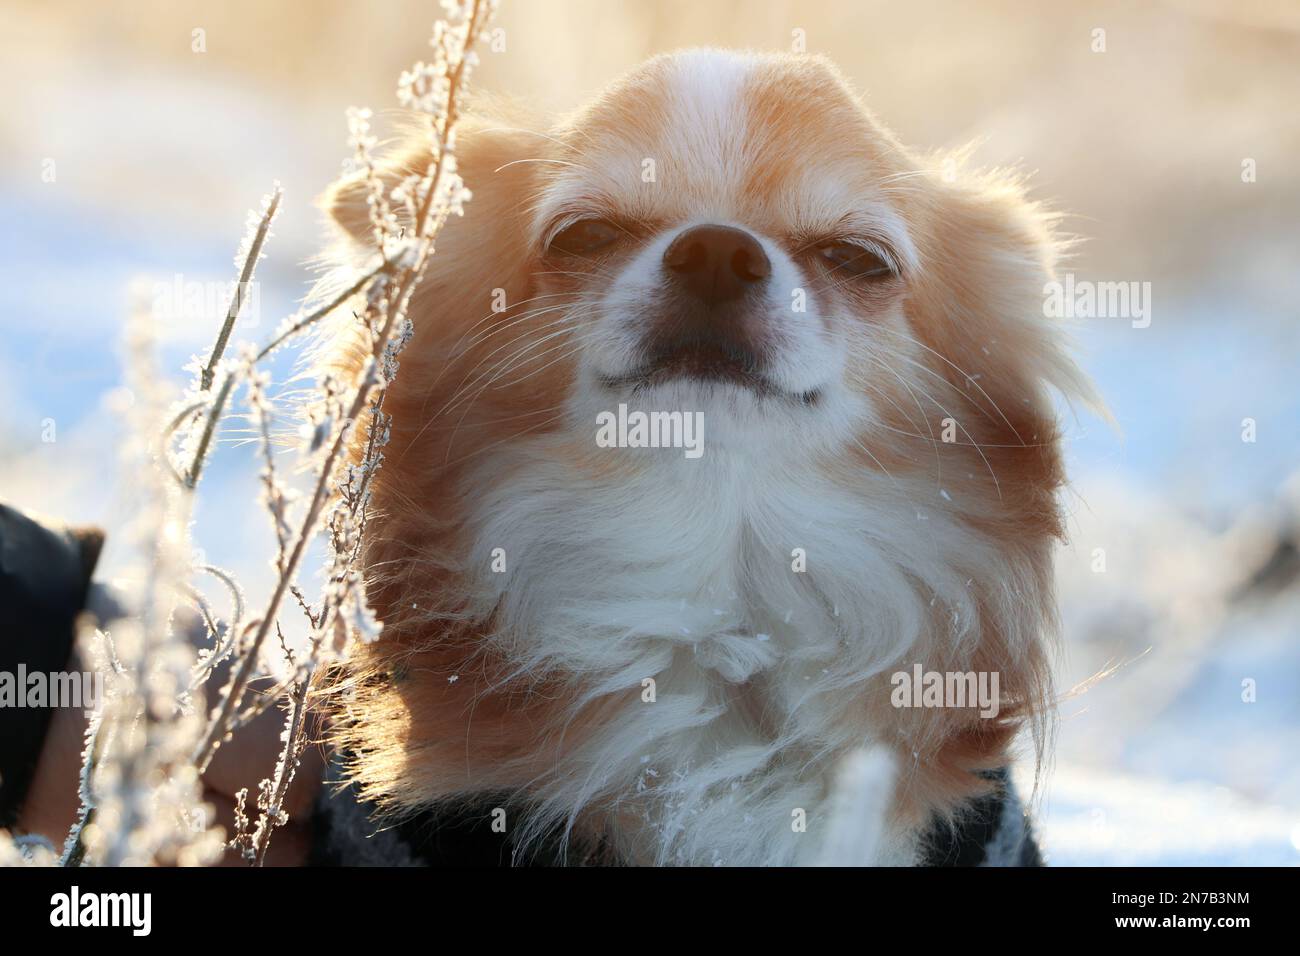 Cute little dog outdoors on winter morning. Snowy weather Stock Photo